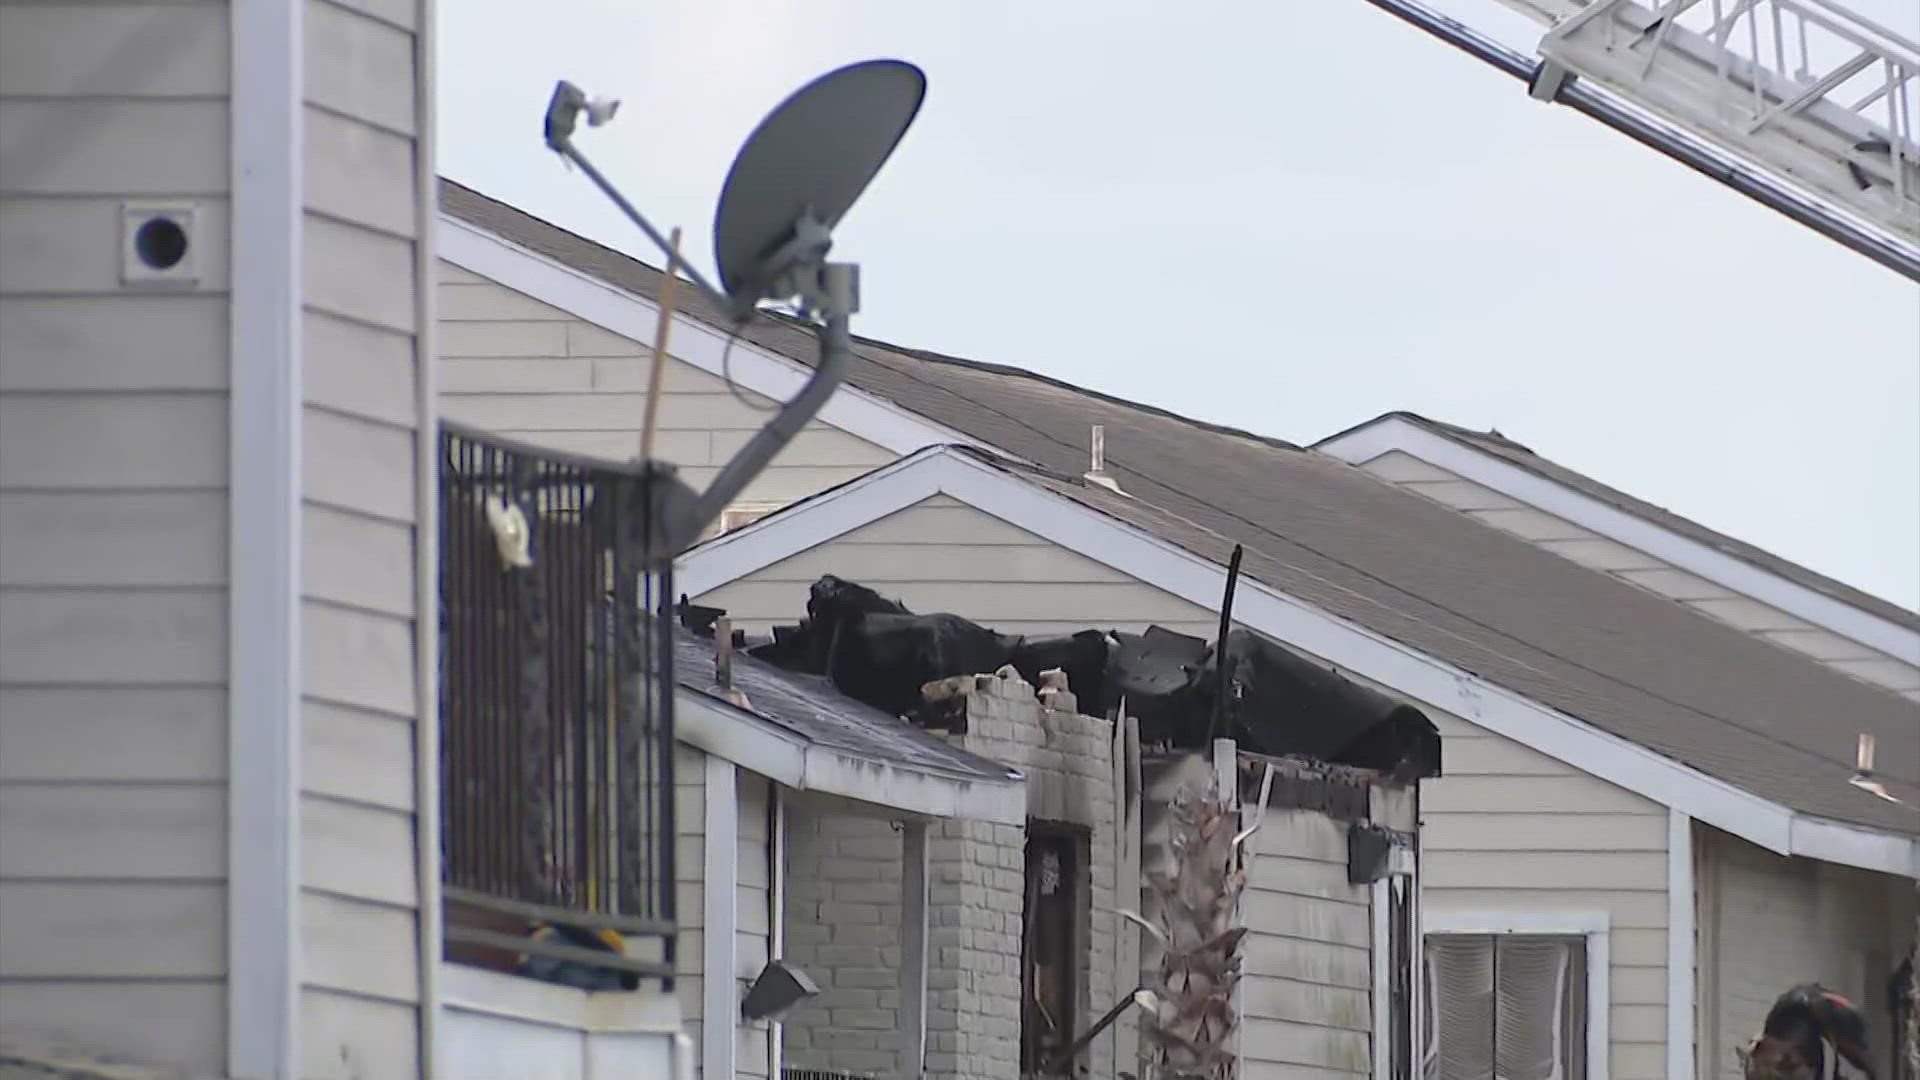 The fire started just before noon on Sunday, according to the Houston Fire Department.